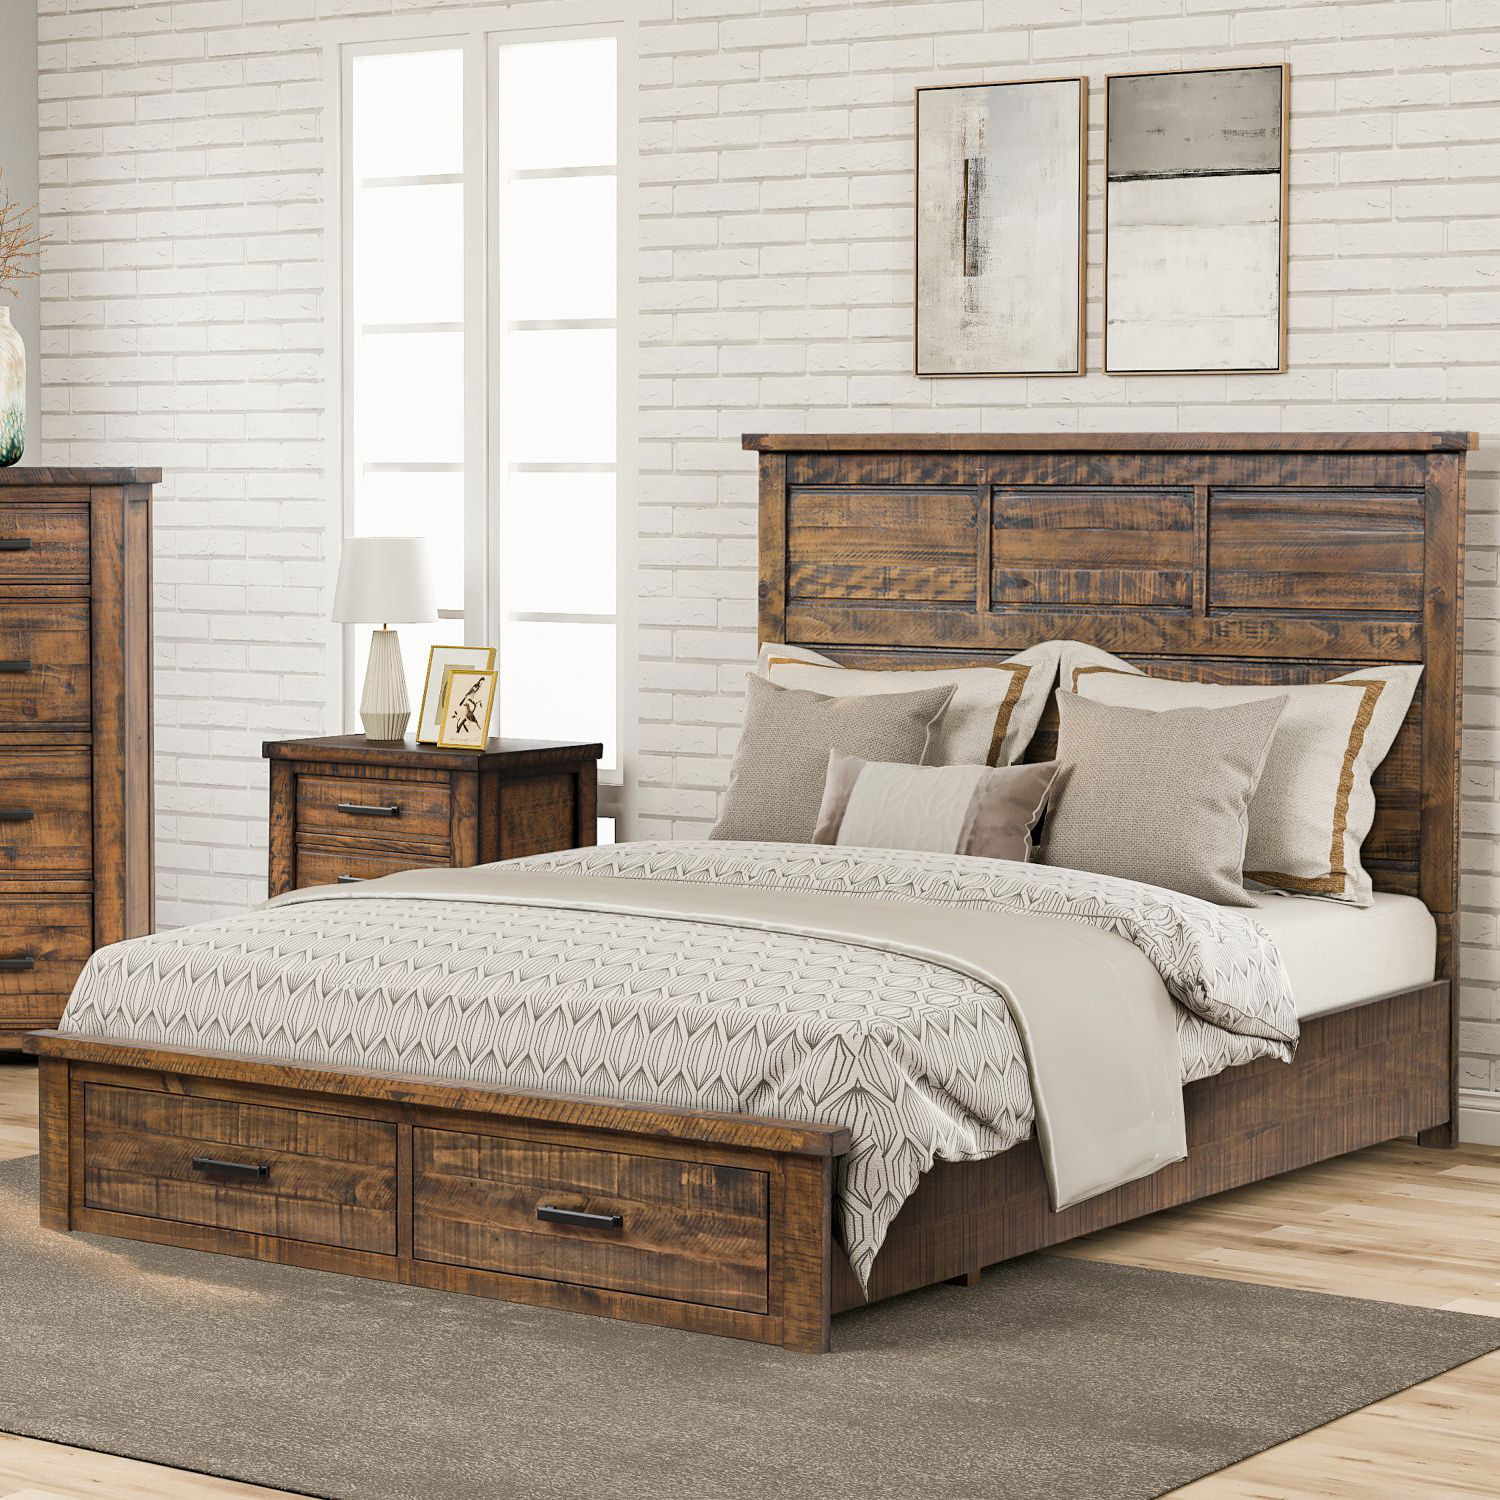 Rustic Reclaimed Pine Wood Queen Size, High Queen Size Bed Frame With Headboard